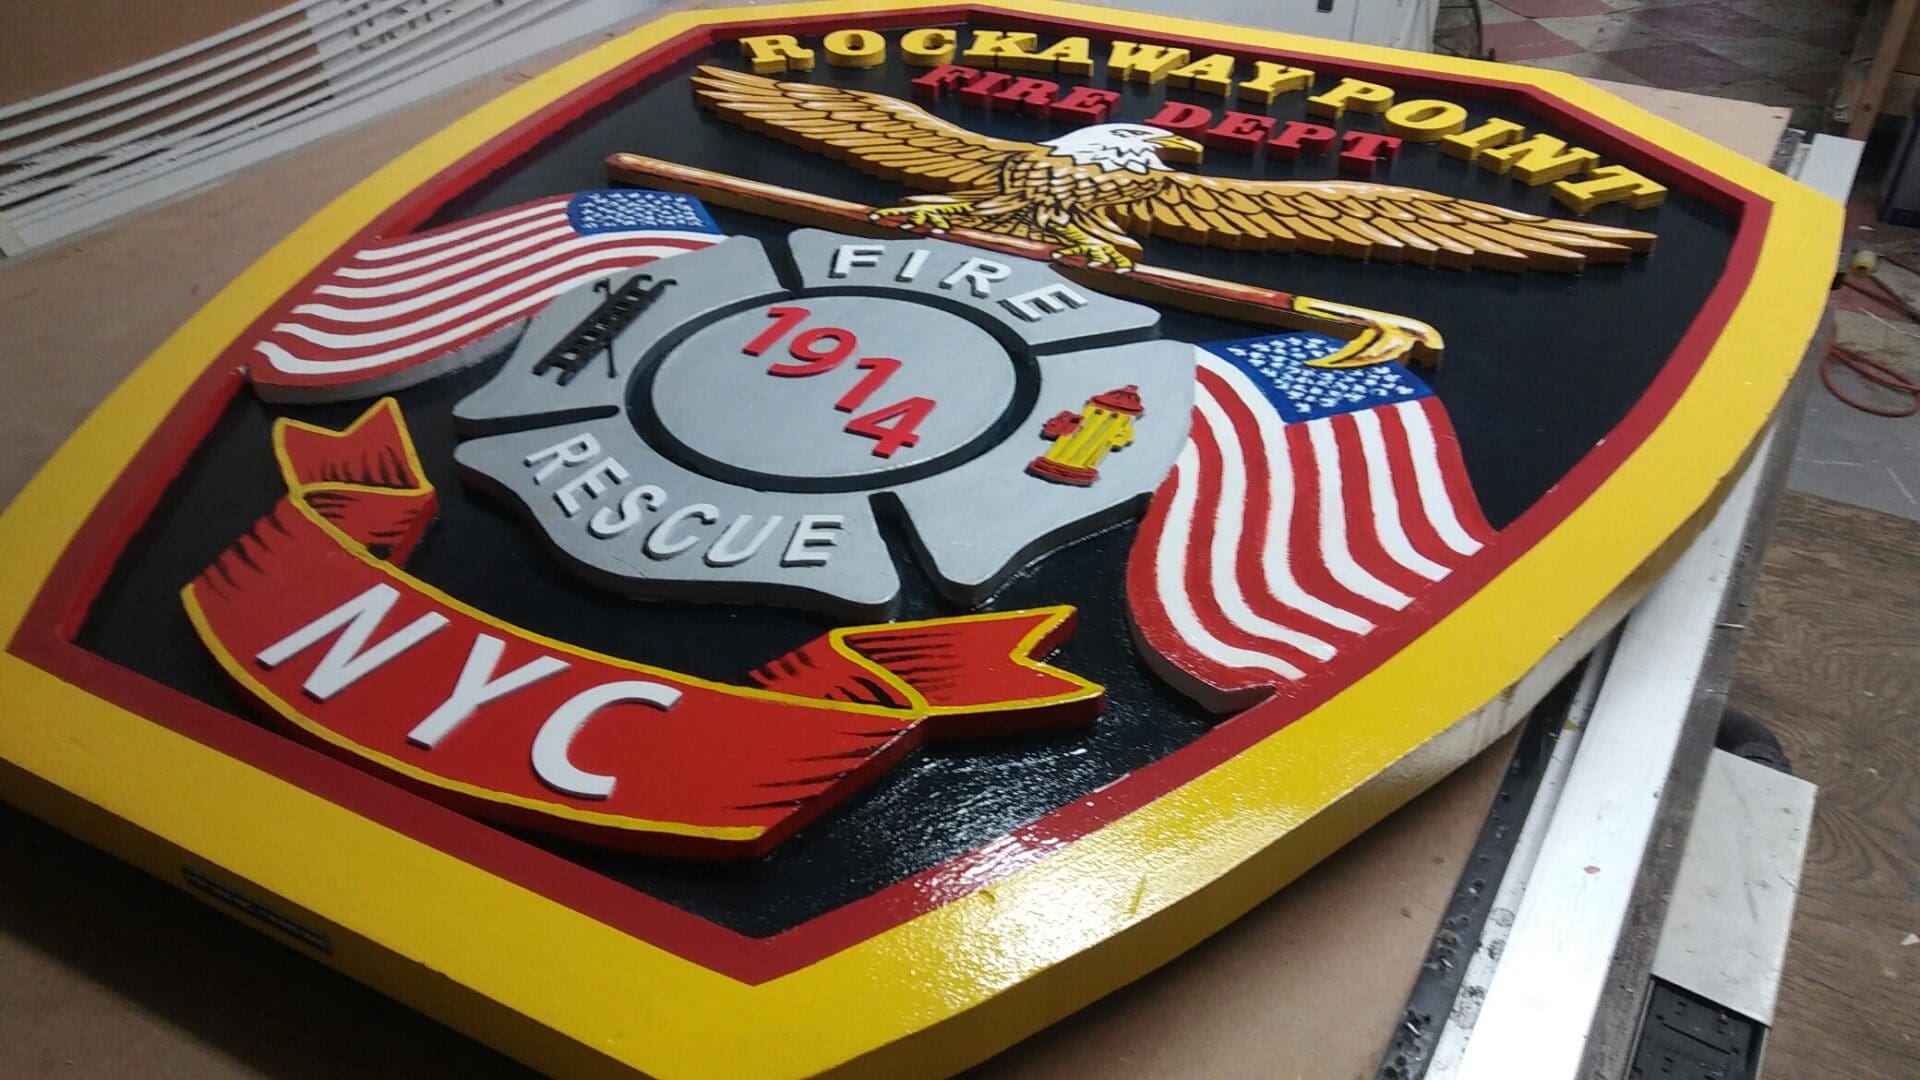 A colorful emblem of the Rockaway Point Fire Department featuring symbols of eagles, flags, and the ADP USA initials, dated 1914.